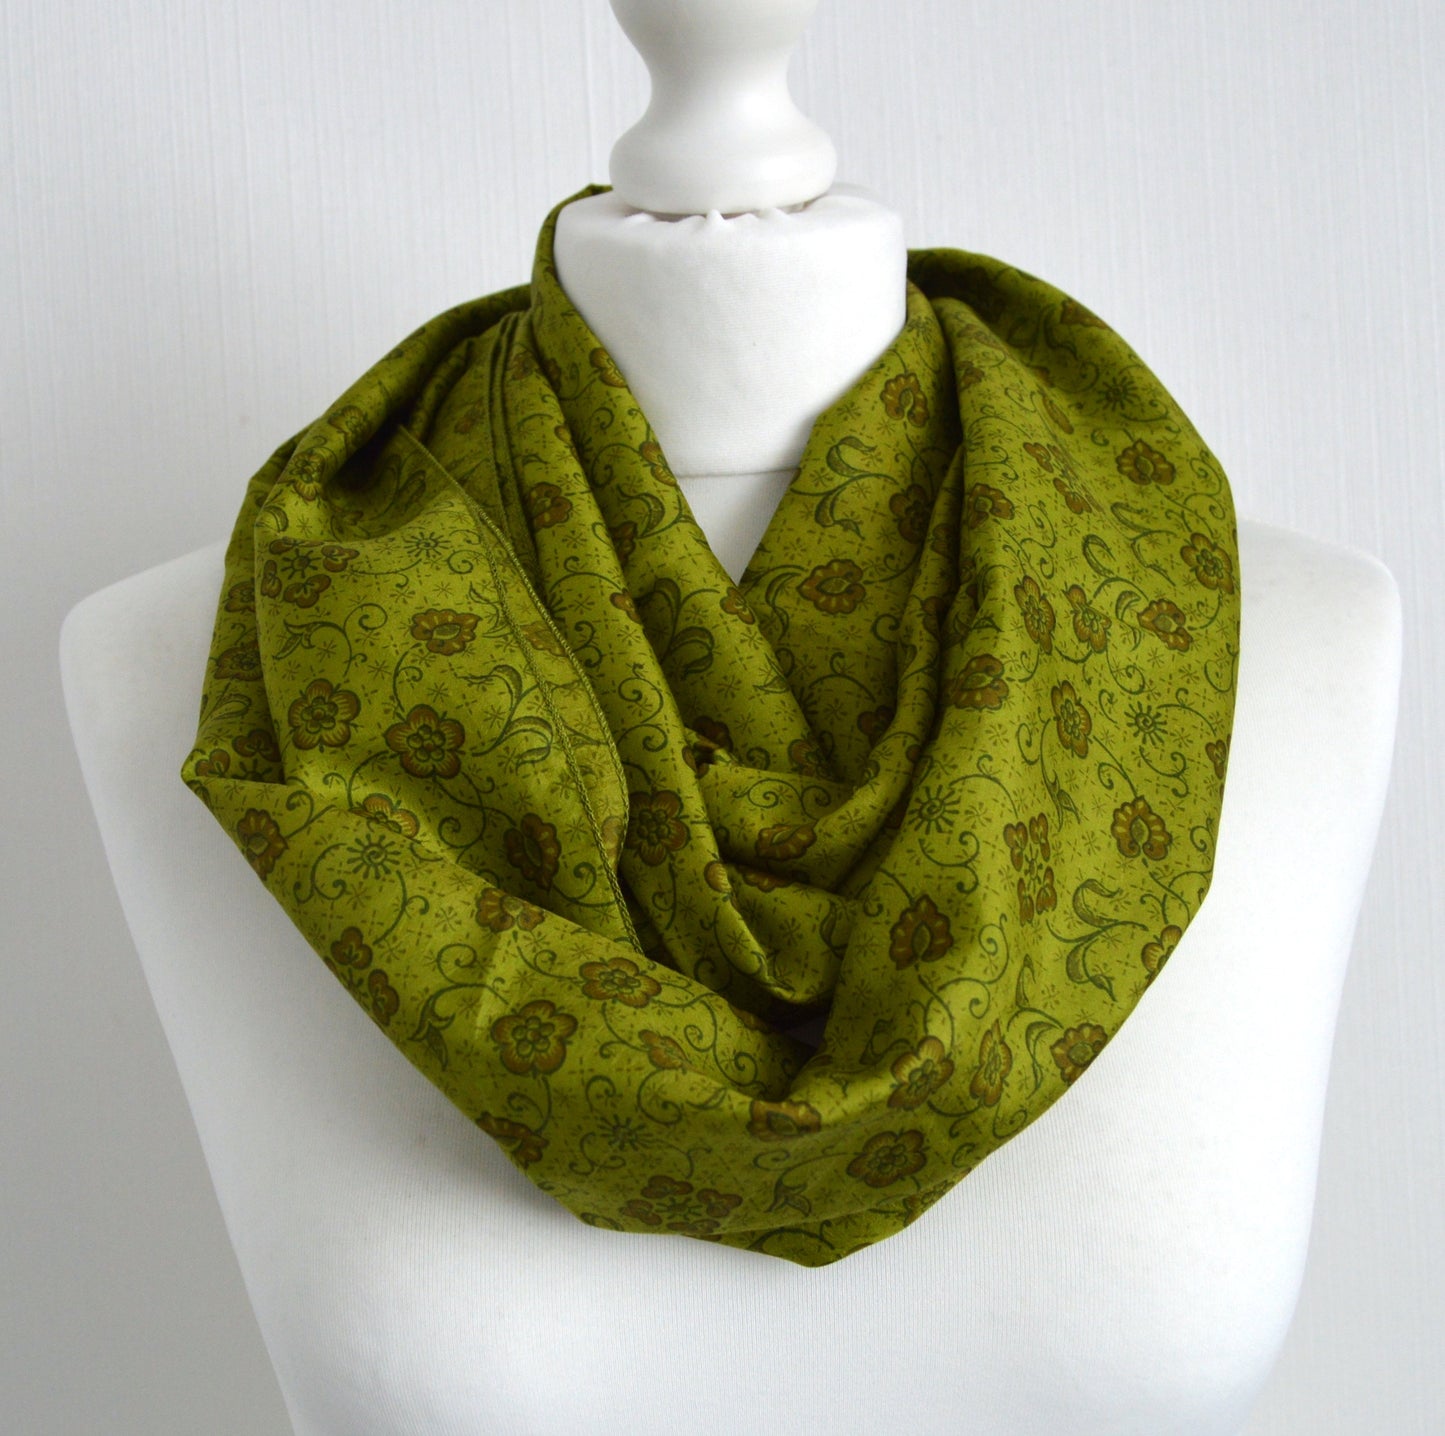 Olive Upcycled Pure Silk Sari Infinity Loop Scarf Nursing Cover - Lightweight Handmade Bohemian Festival Scarf Wrap - Baby Shower Gift